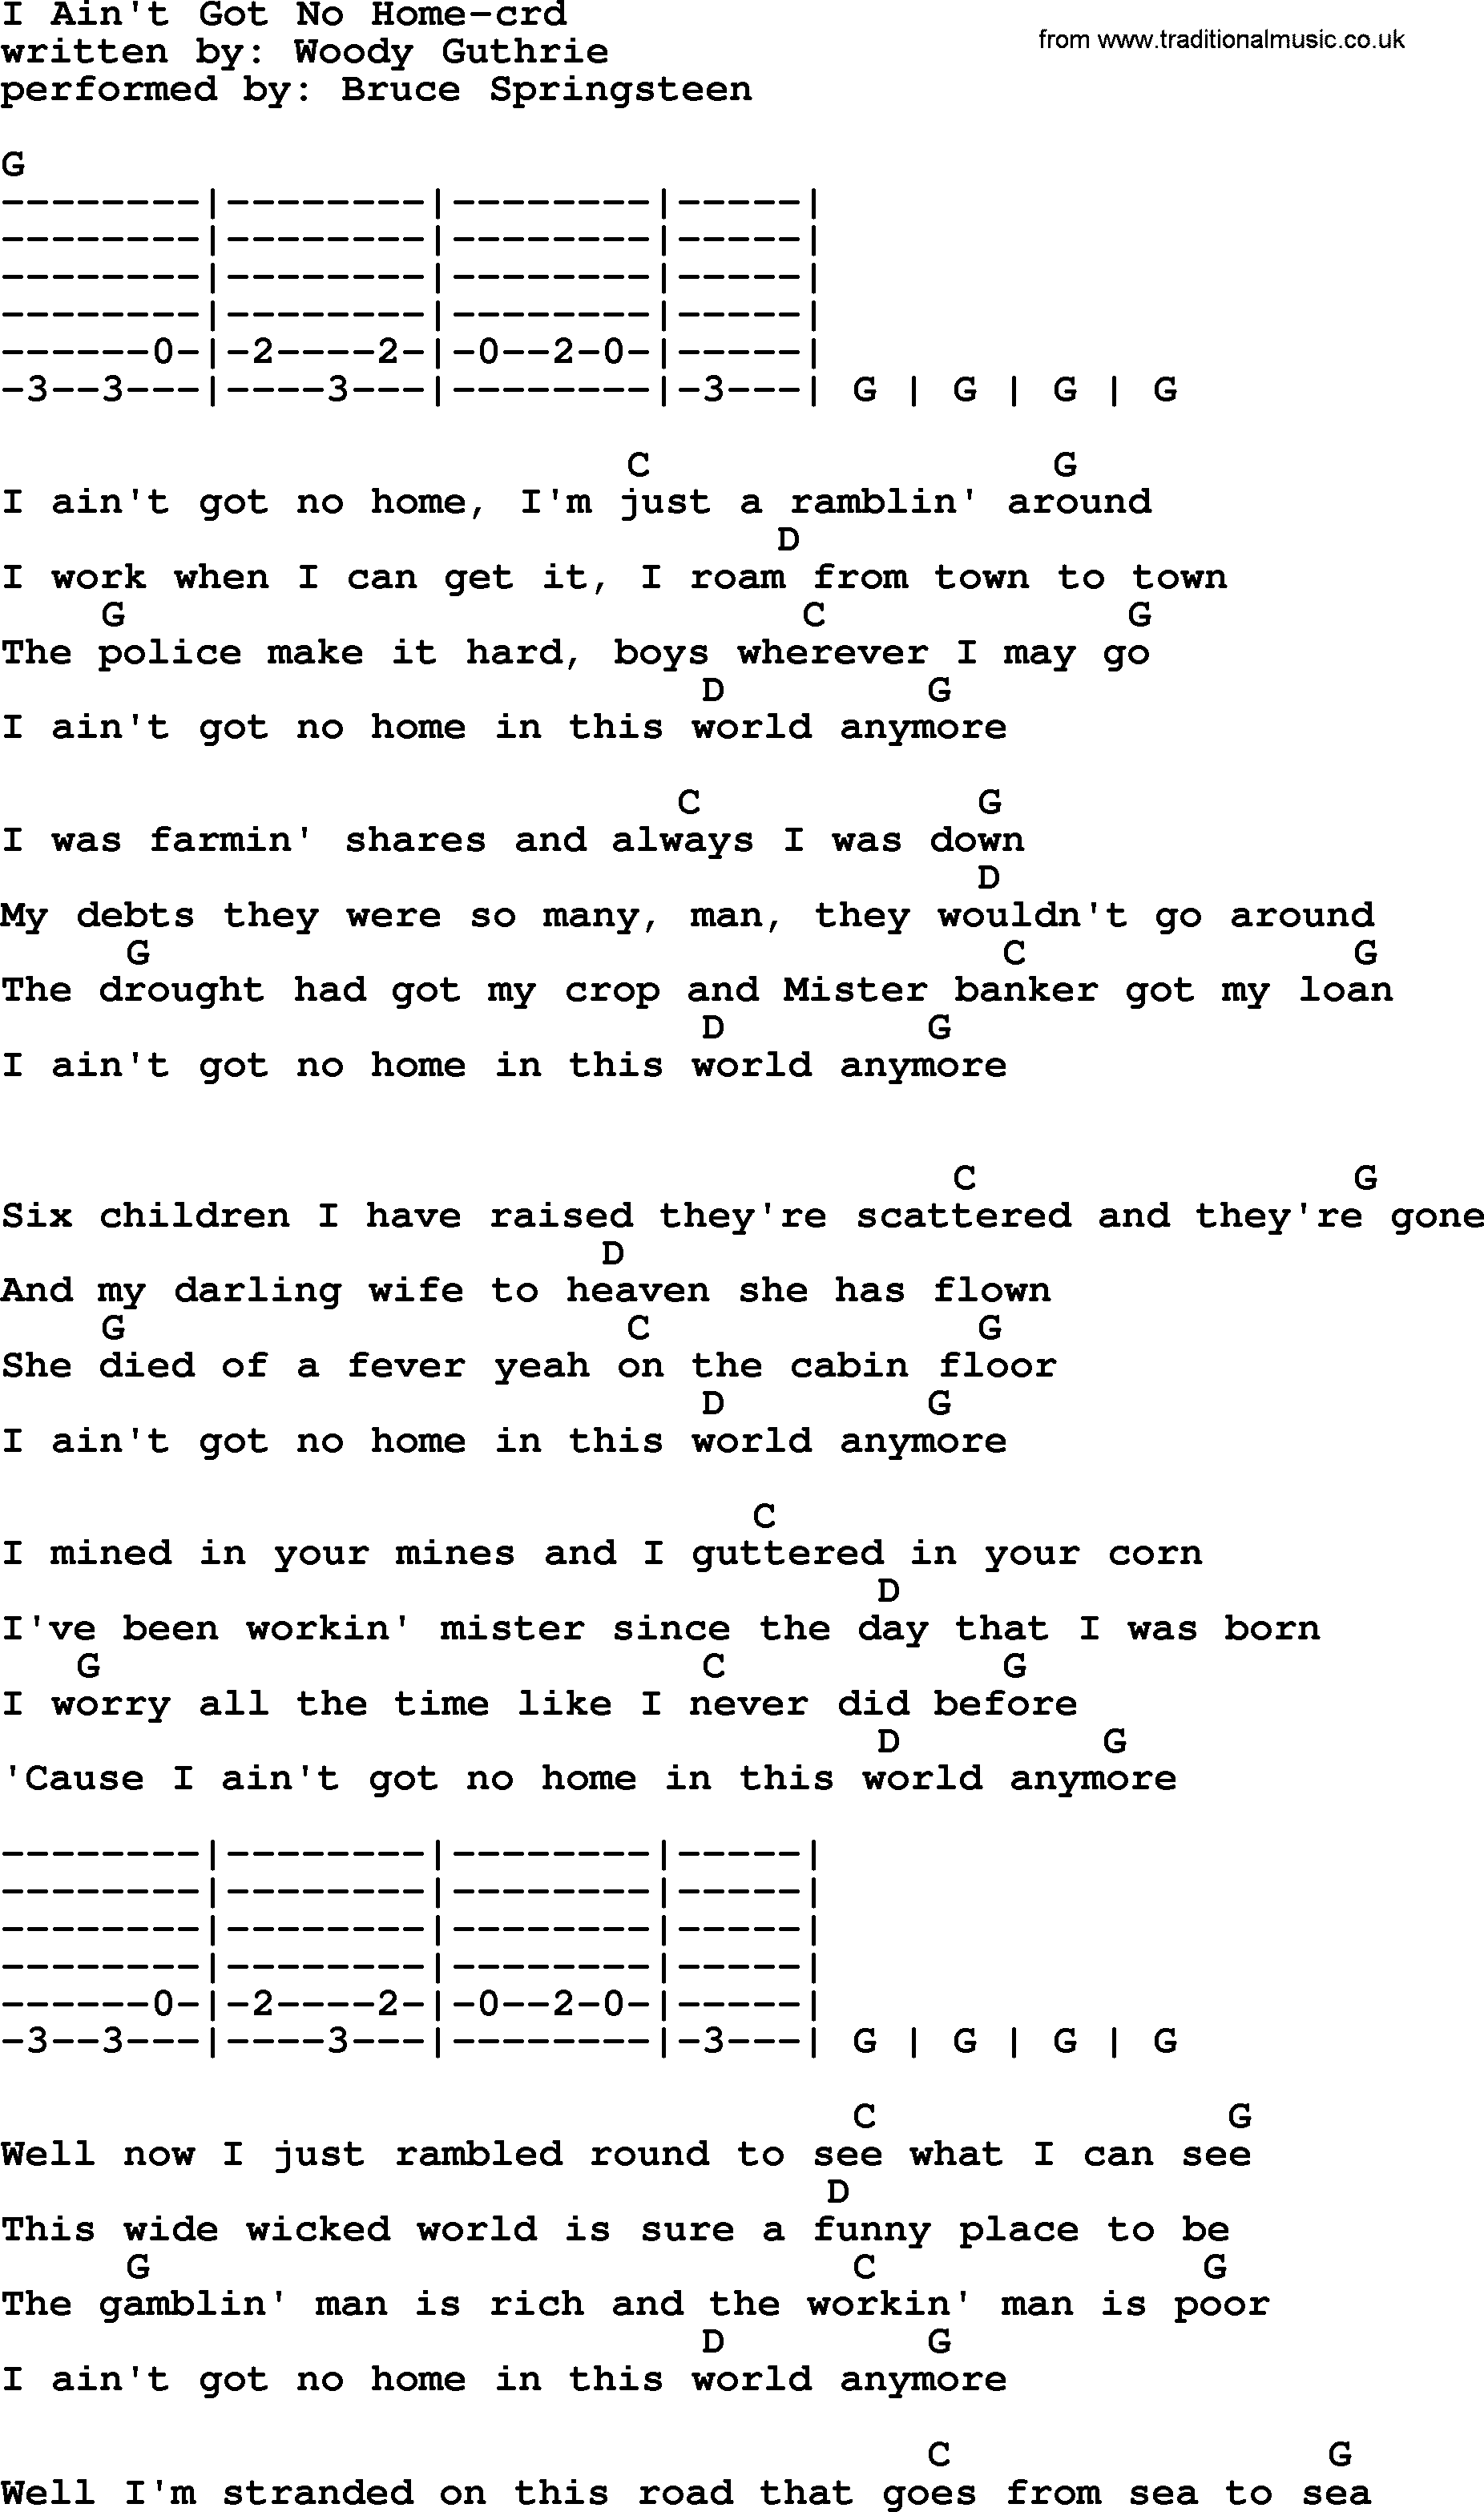 Woody Guthrie song I Ain't Got No Home lyrics and chords